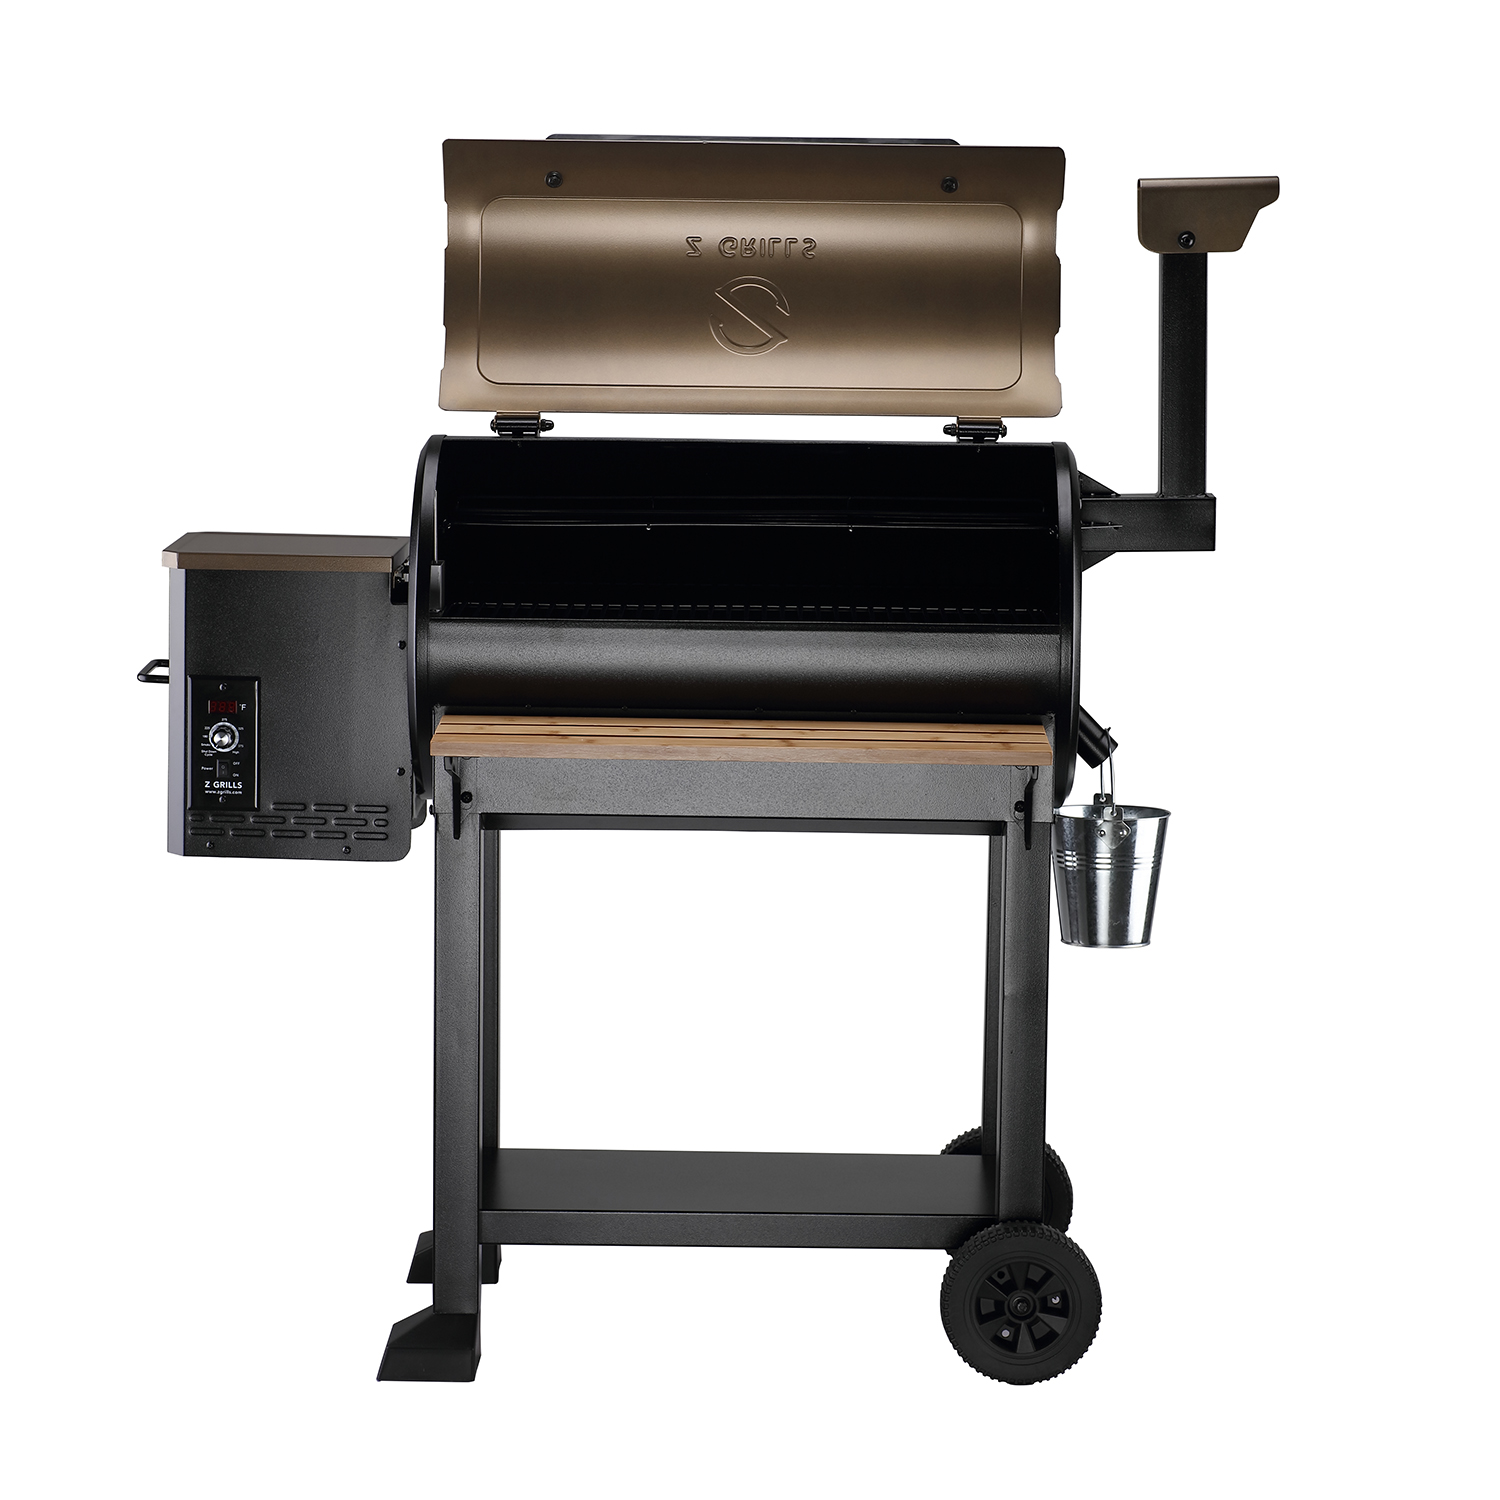 Z GRILLS Wood Pellet Grill and Electric Smoker w/ Auto Temperature Control - image 3 of 6